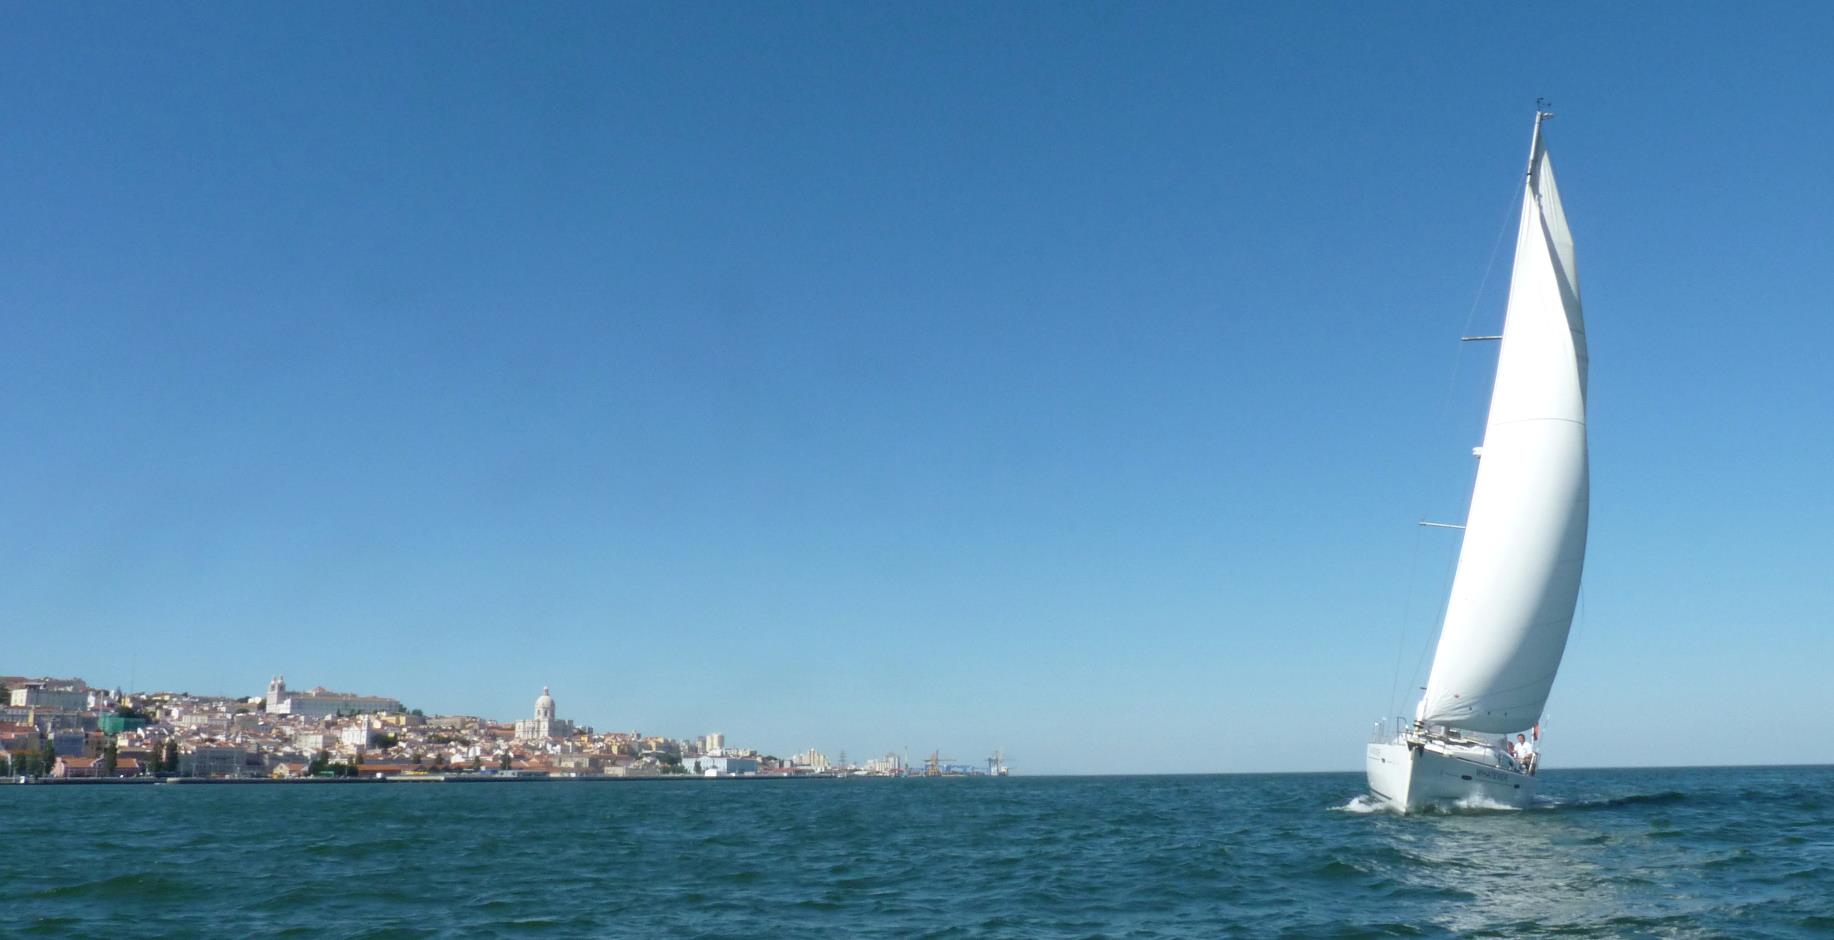 Come and join a sailing lesson in Lisbon